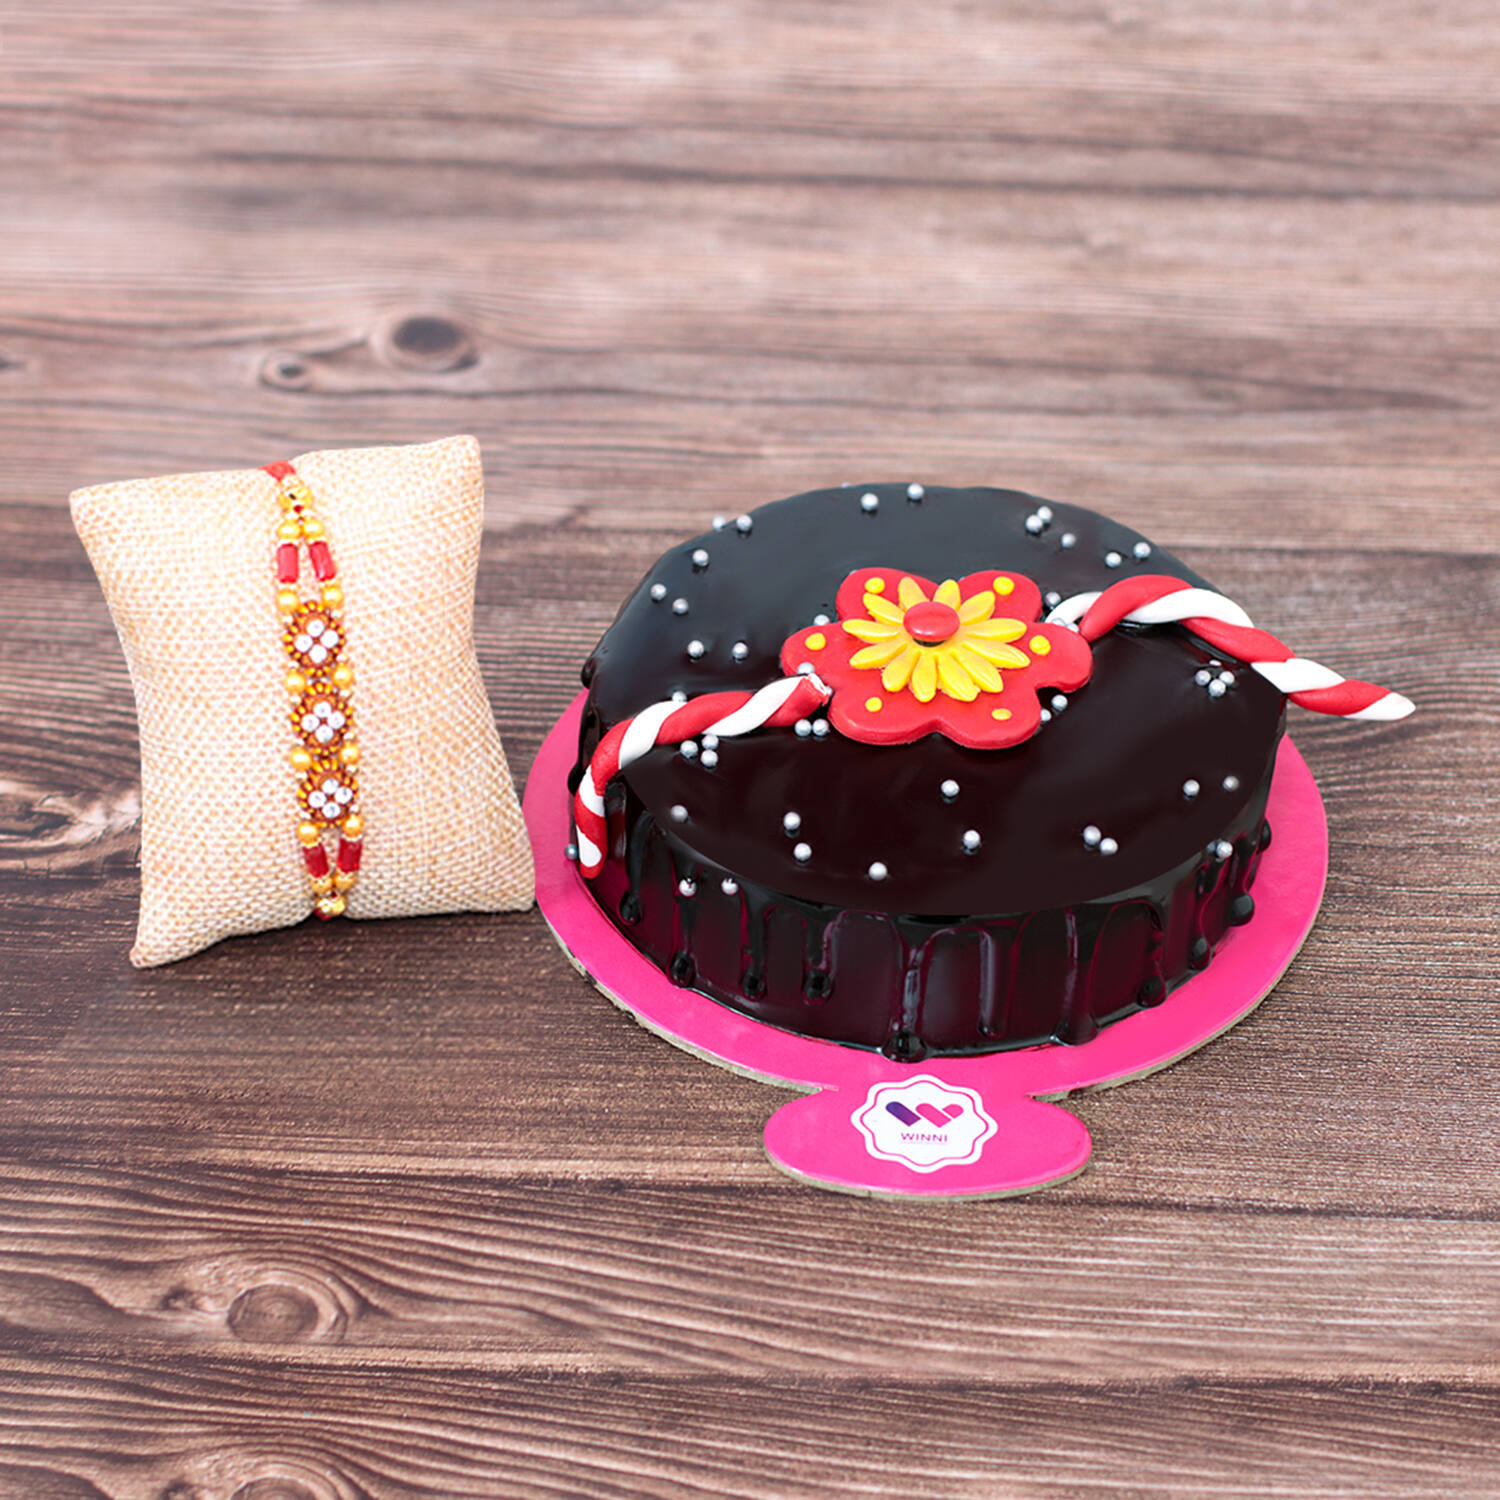 choclate Round delicious cake, Packaging Size: 45*45, Weight: 500 Gm at Rs  500/gram in Kanpur